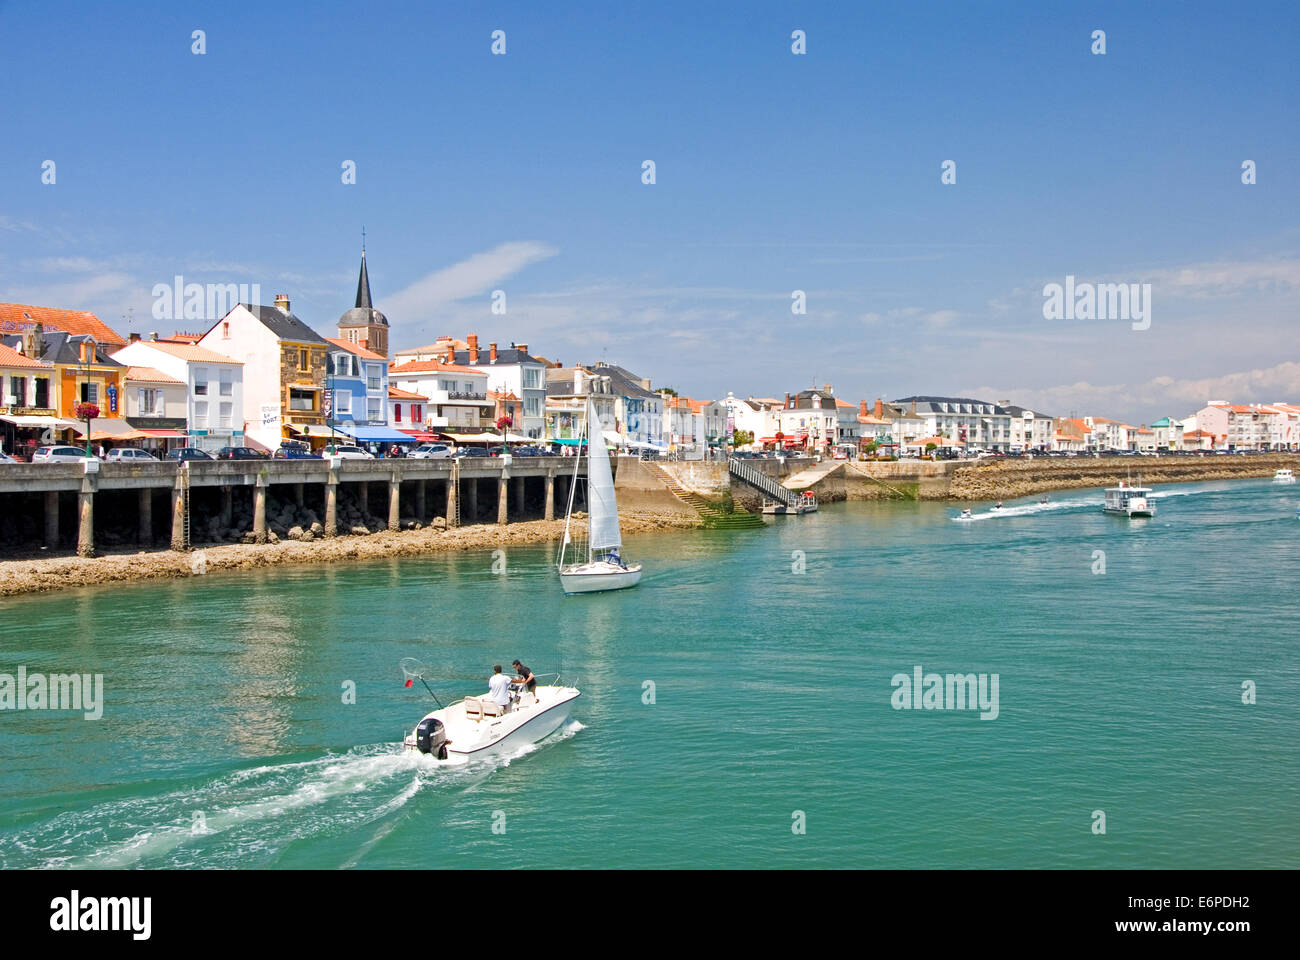 Boats entering and leaving the harbour at La Chaume / Les Sables D'Olonne, with the quayside of La Chaume. Stock Photo